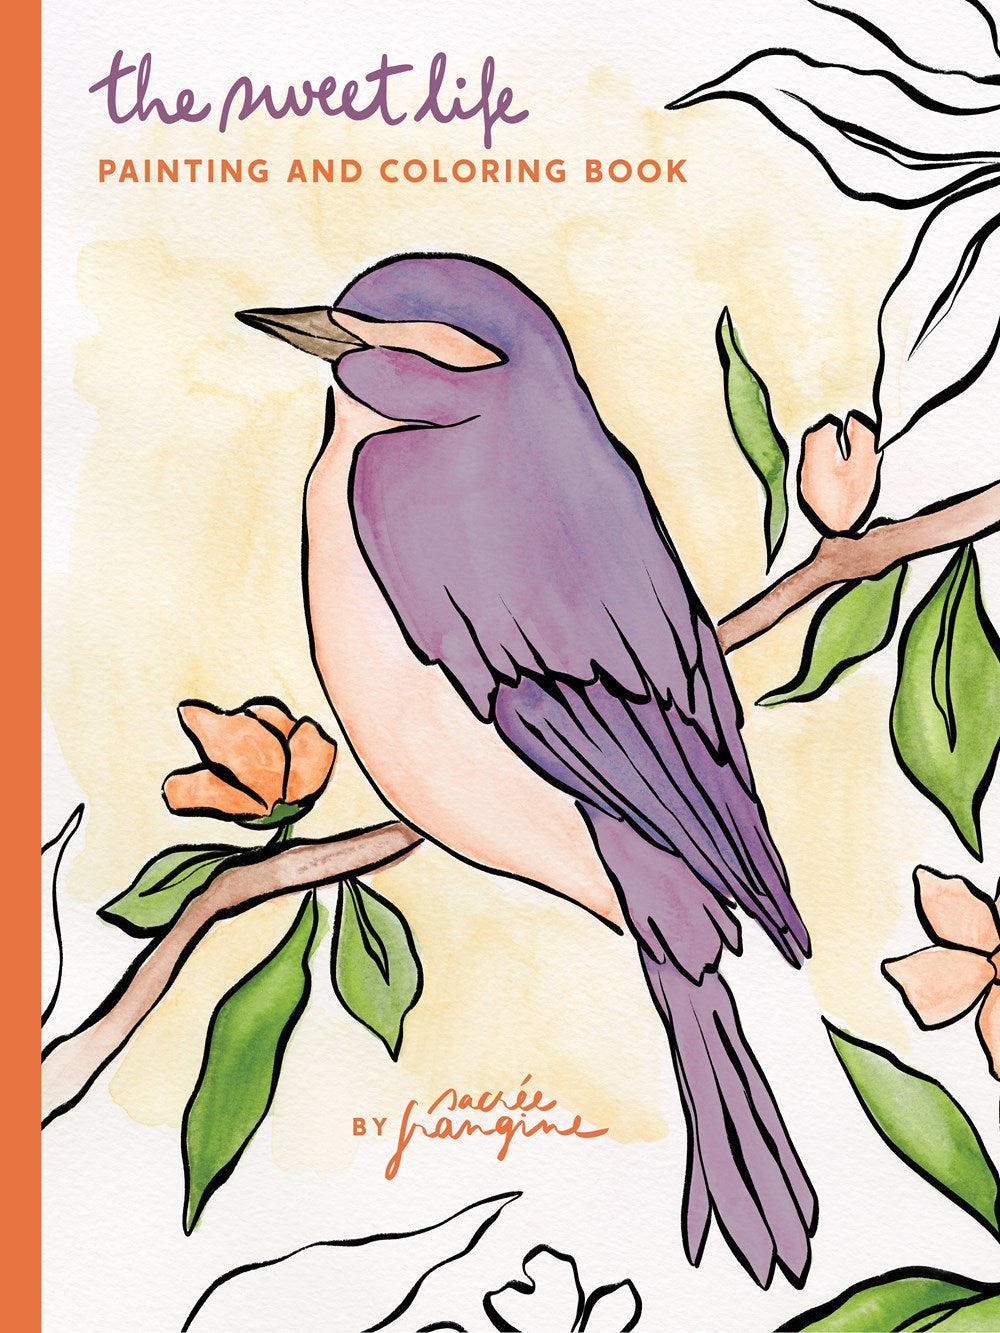 PRE-ORDER: The Sweet Life Painting and Coloring Book